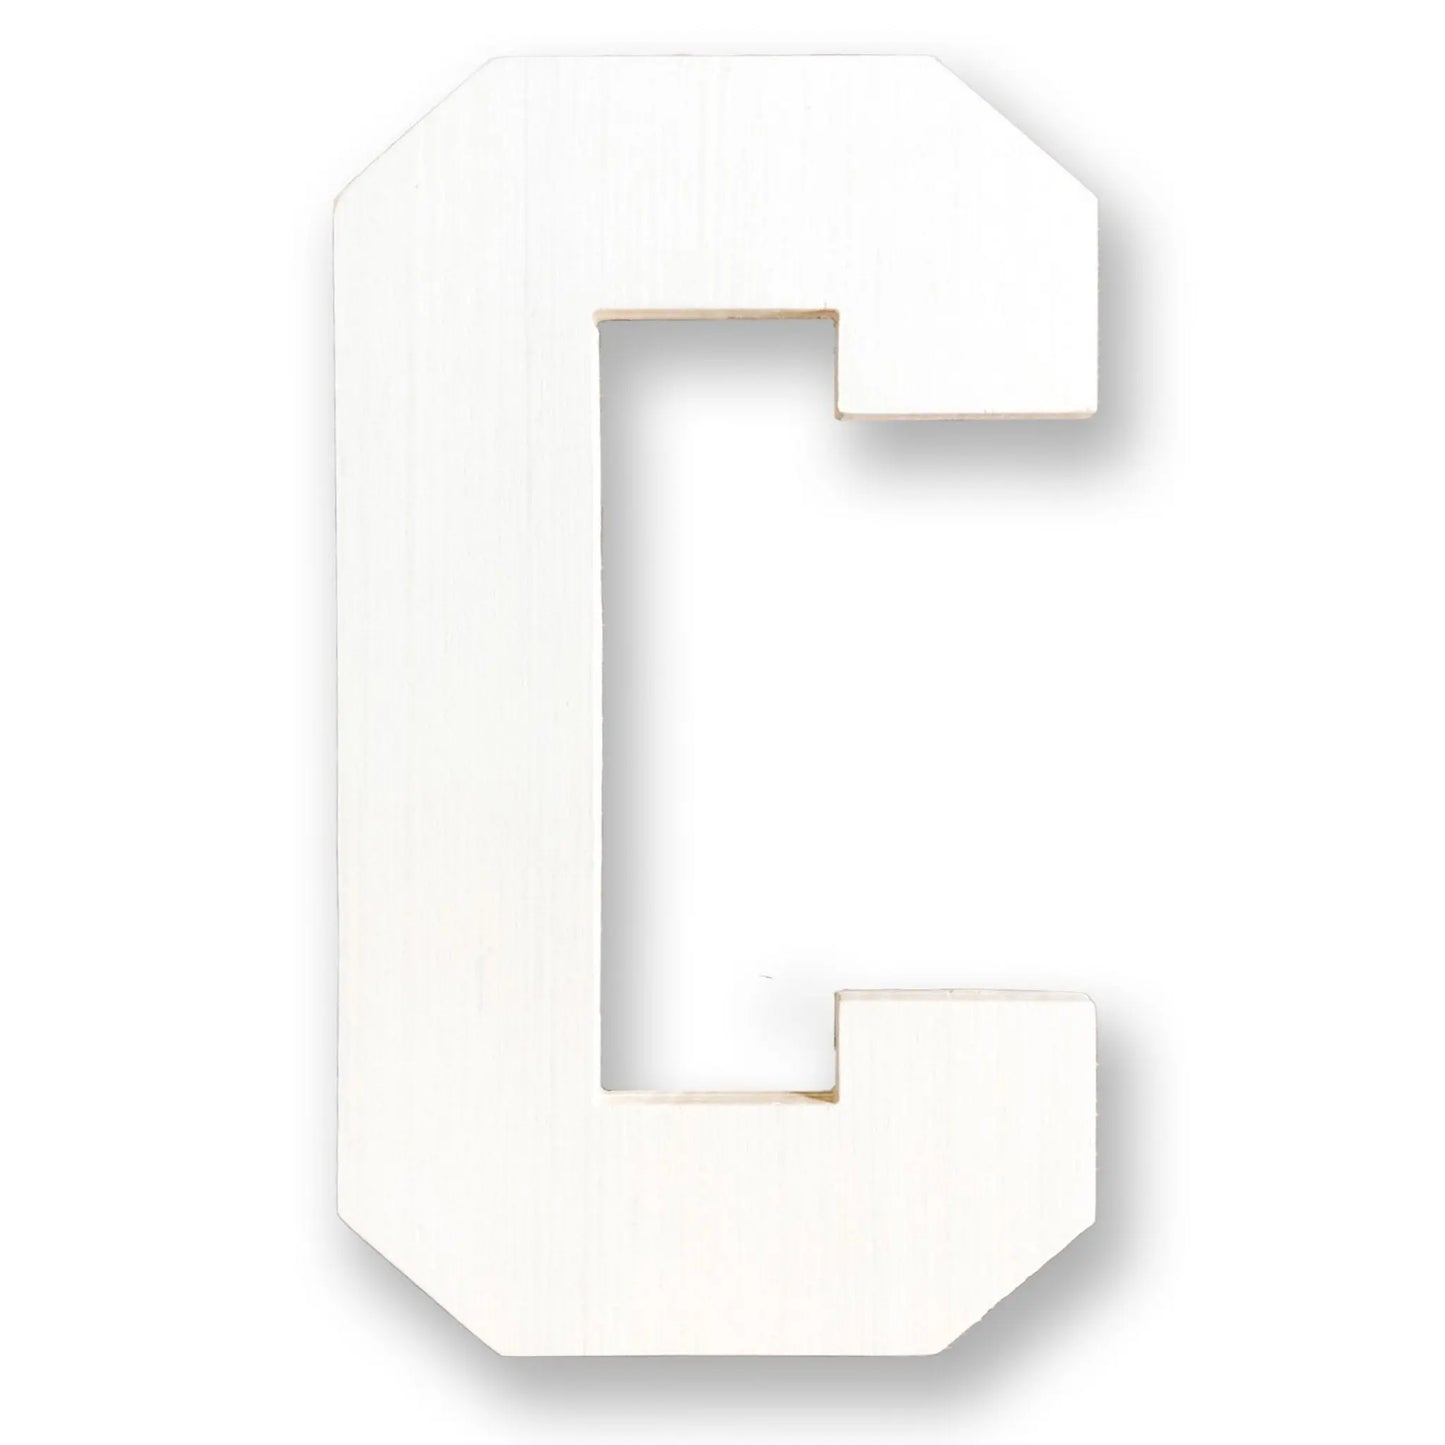 Large Wood Letter C, Jumbo Wooden Letters For Special Events!